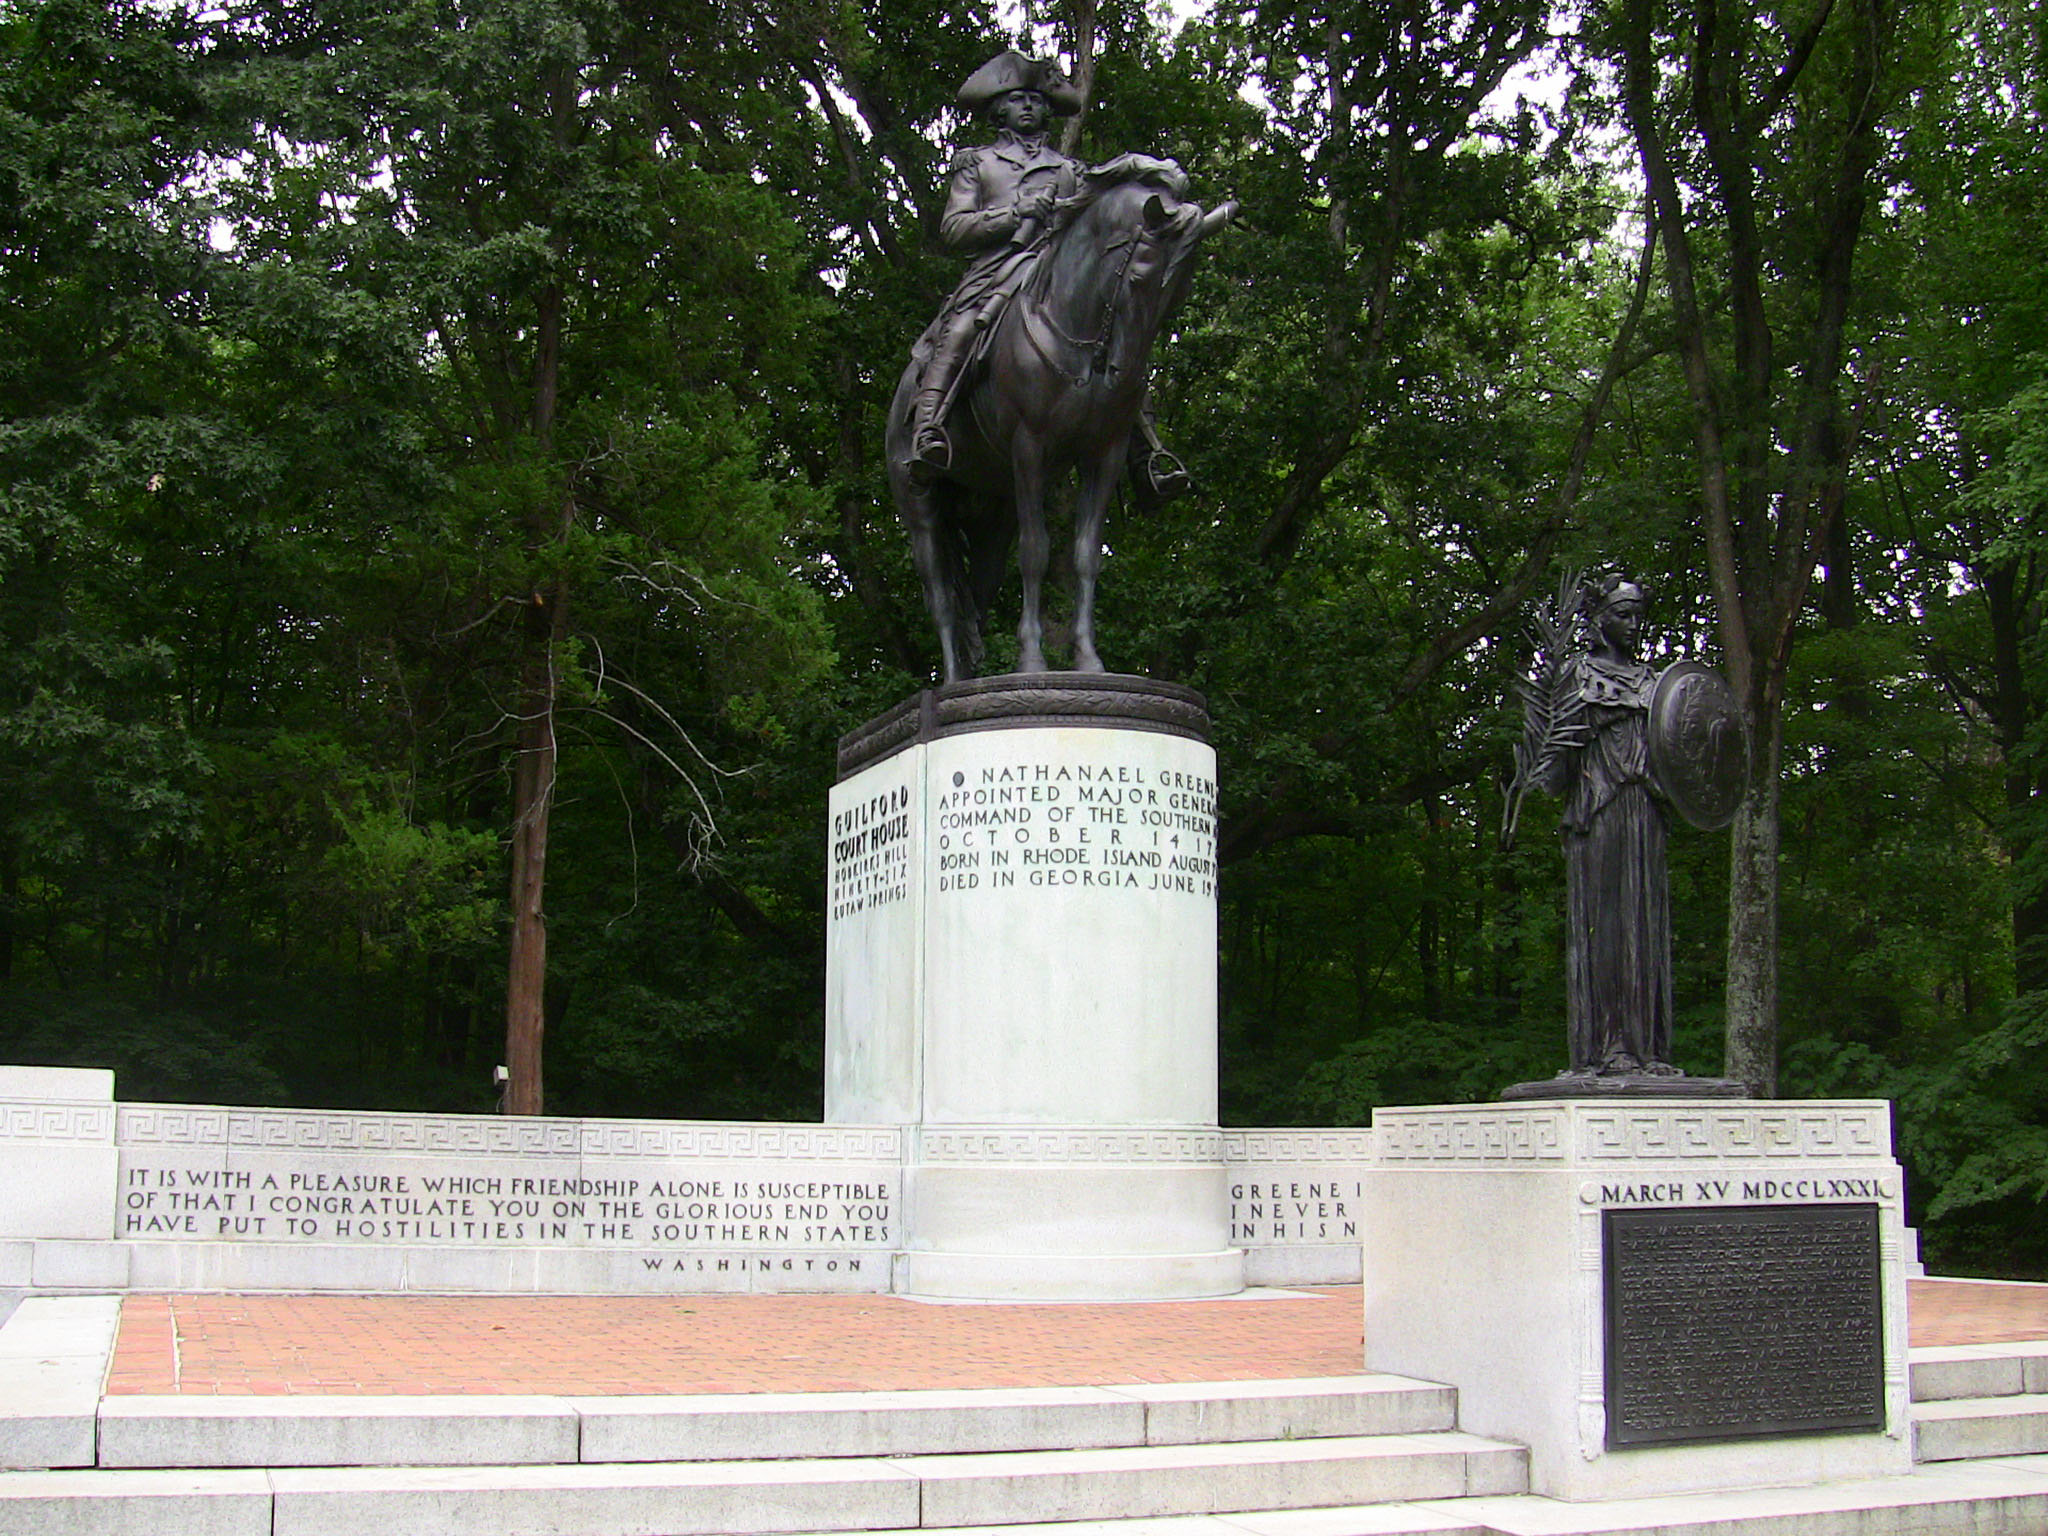 The Nathaniel Greene monument at the Guilford Courthouse battleground site in Greensboro.